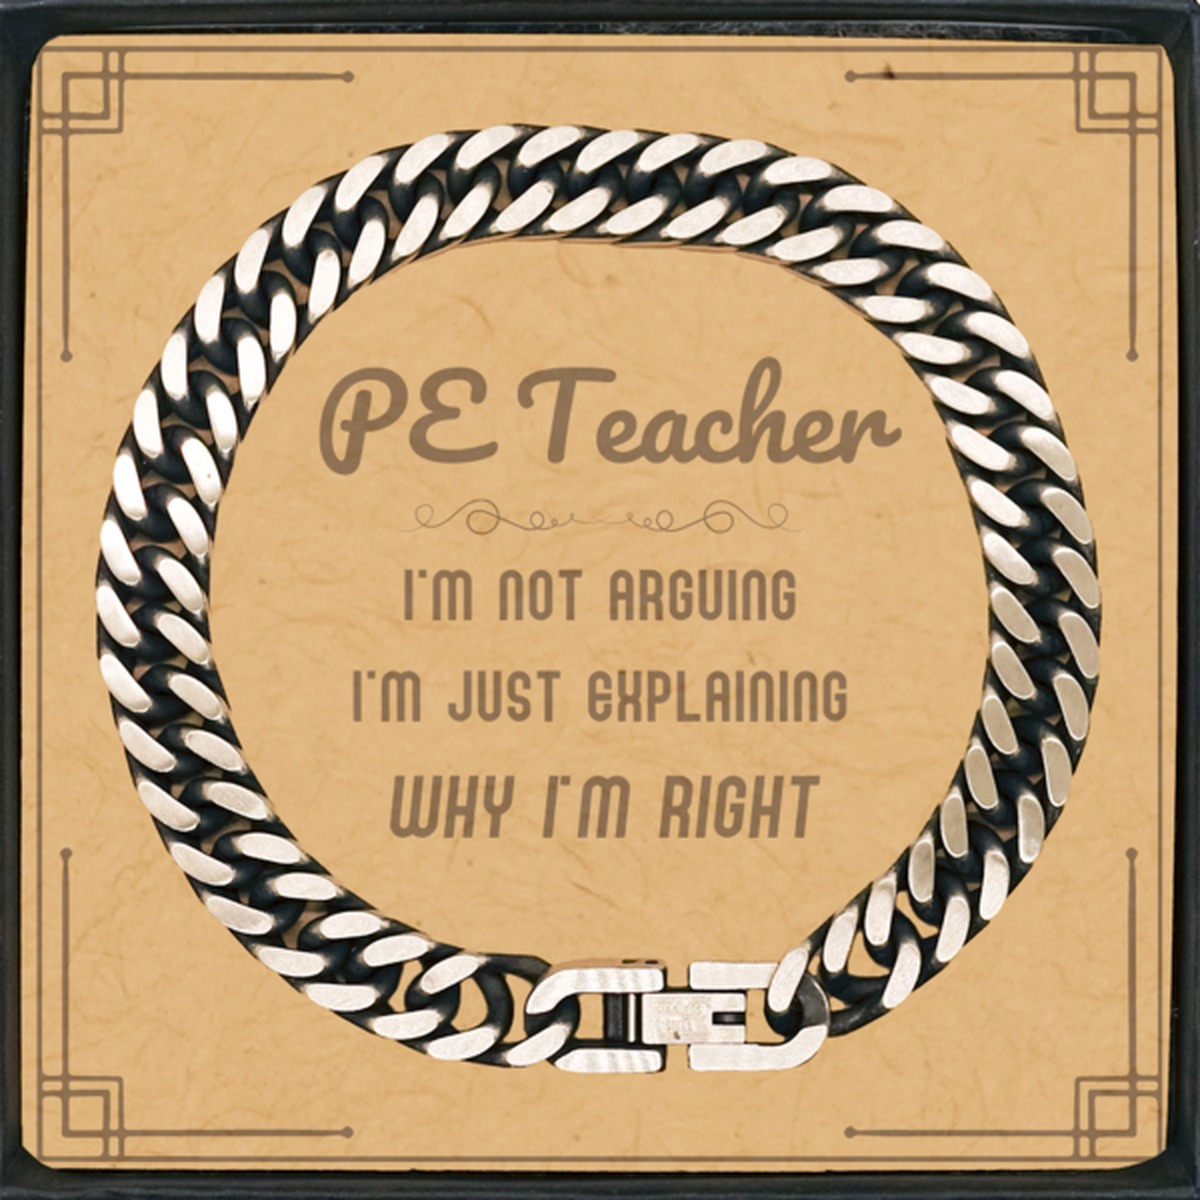 PE Teacher I'm not Arguing. I'm Just Explaining Why I'm RIGHT Cuban Link Chain Bracelet, Funny Saying Quote PE Teacher Gifts For PE Teacher Message Card Graduation Birthday Christmas Gifts for Men Women Coworker